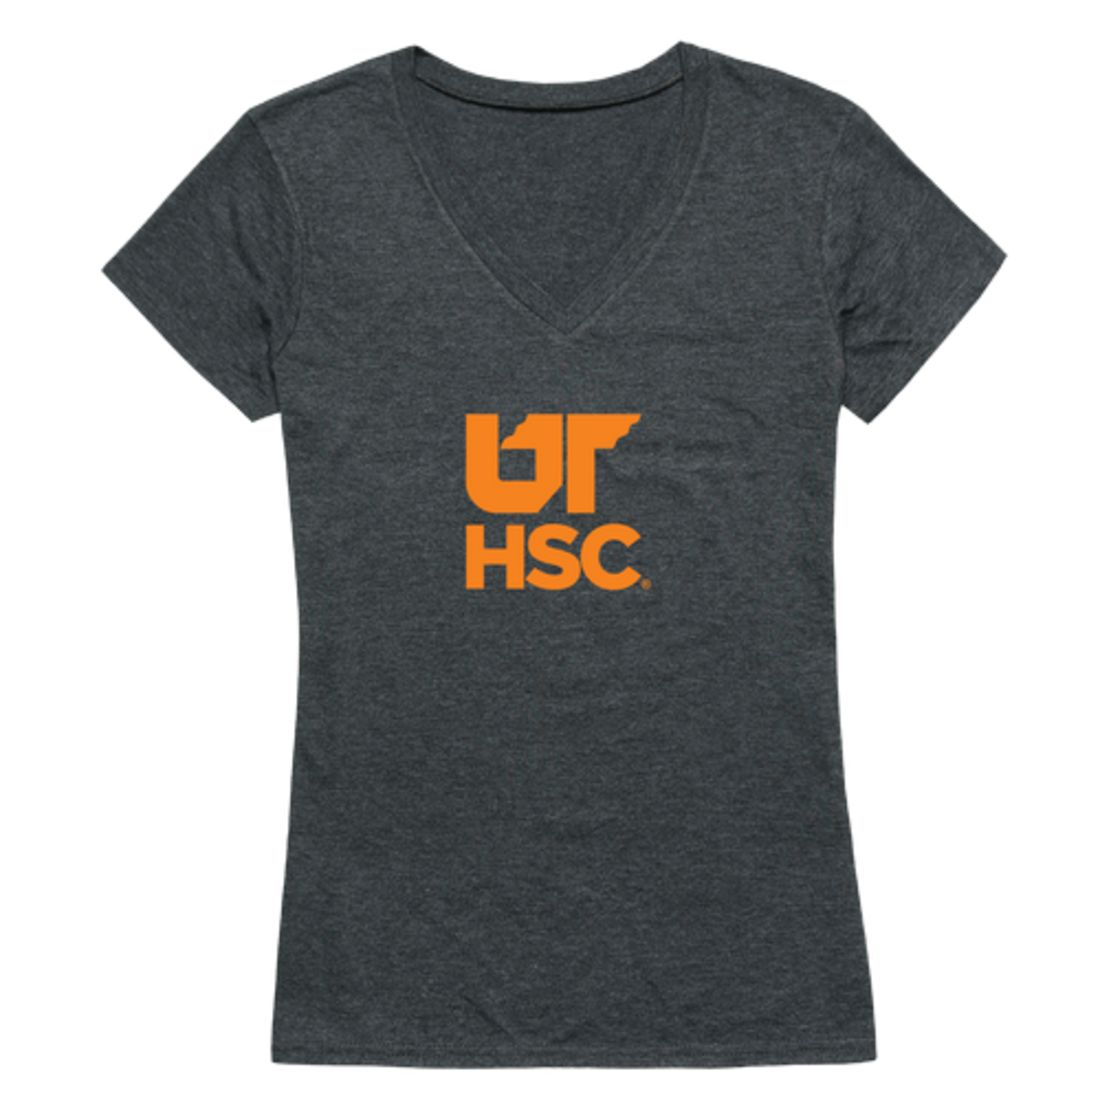 University of Tennessee Health Science Center Womens Cinder T-Shirt